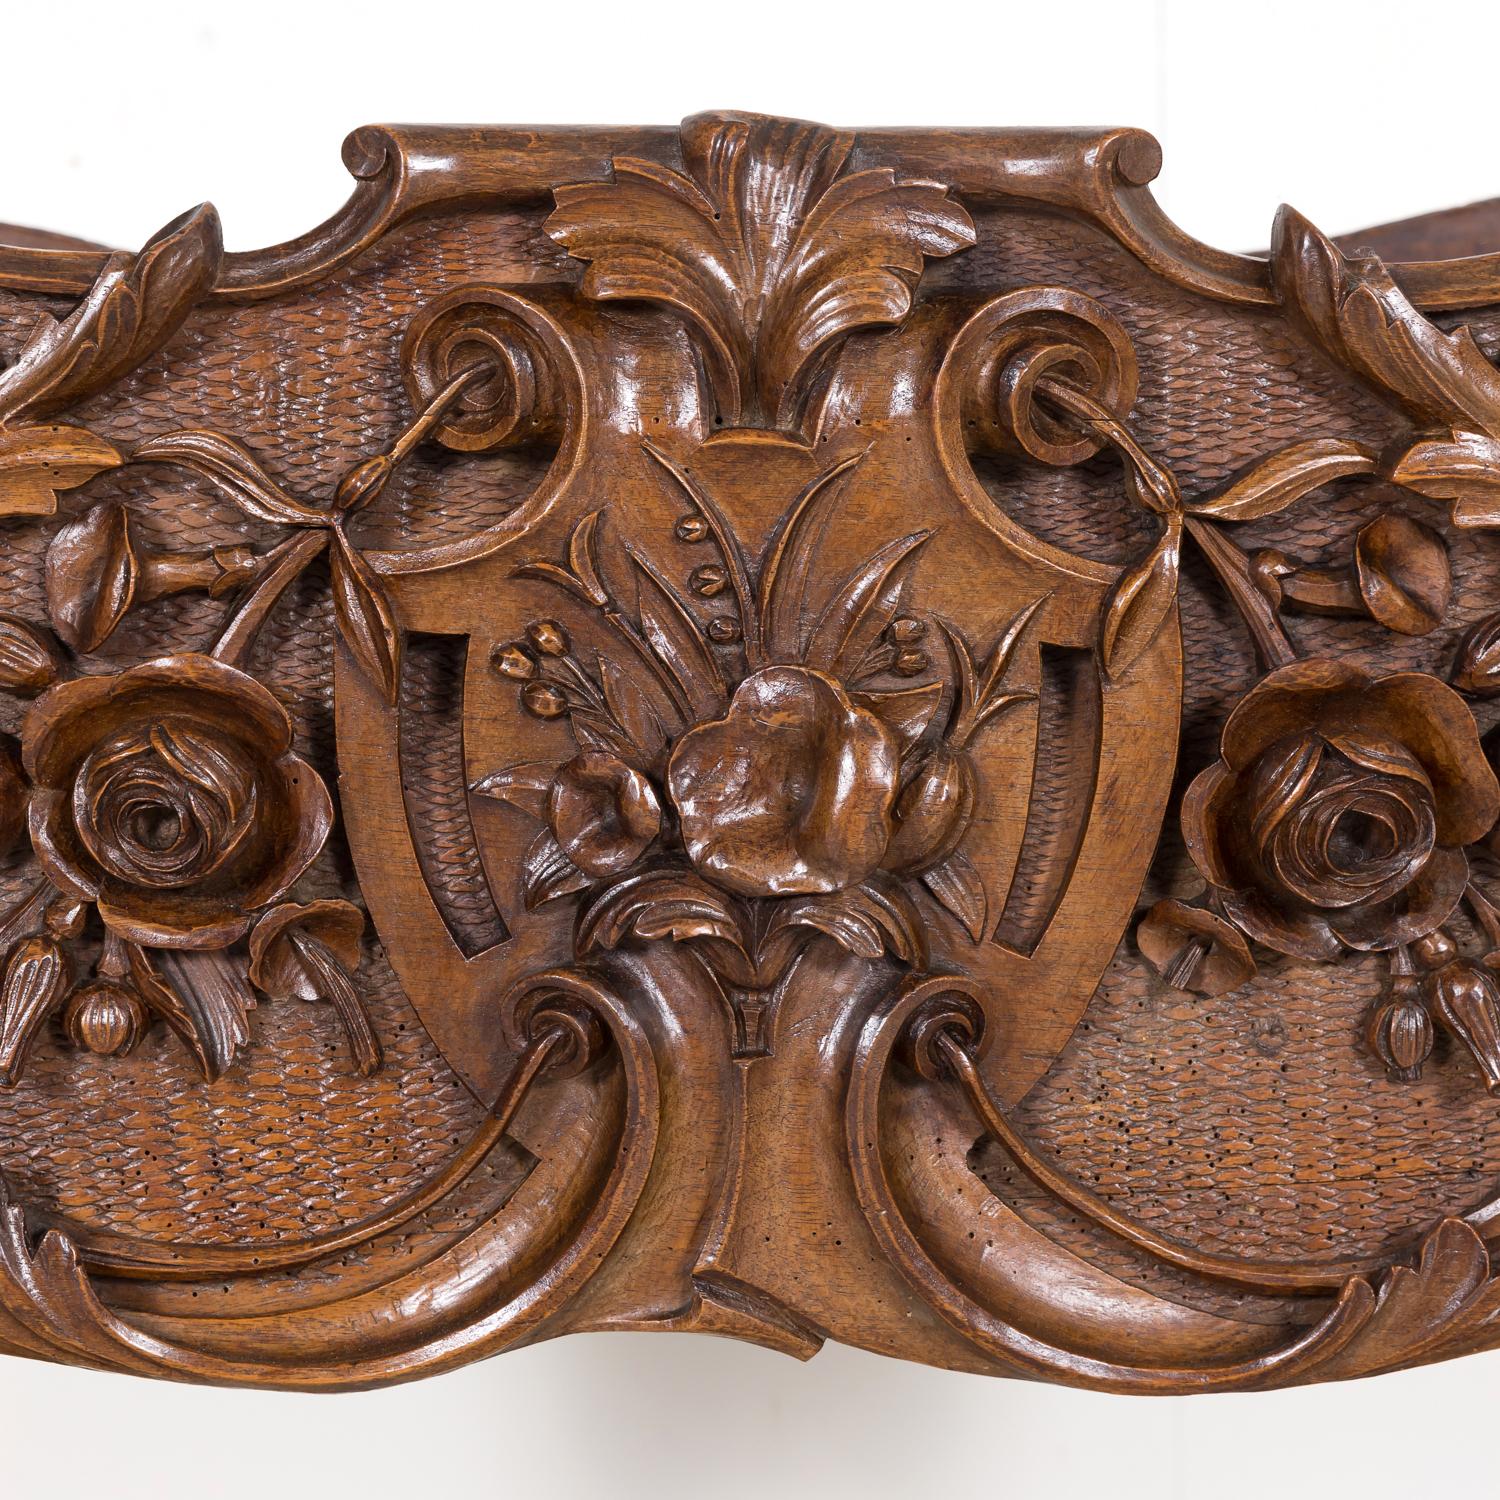 19th Century French Hand Carved Walnut Black Forest Jardiniére or Planter For Sale 3